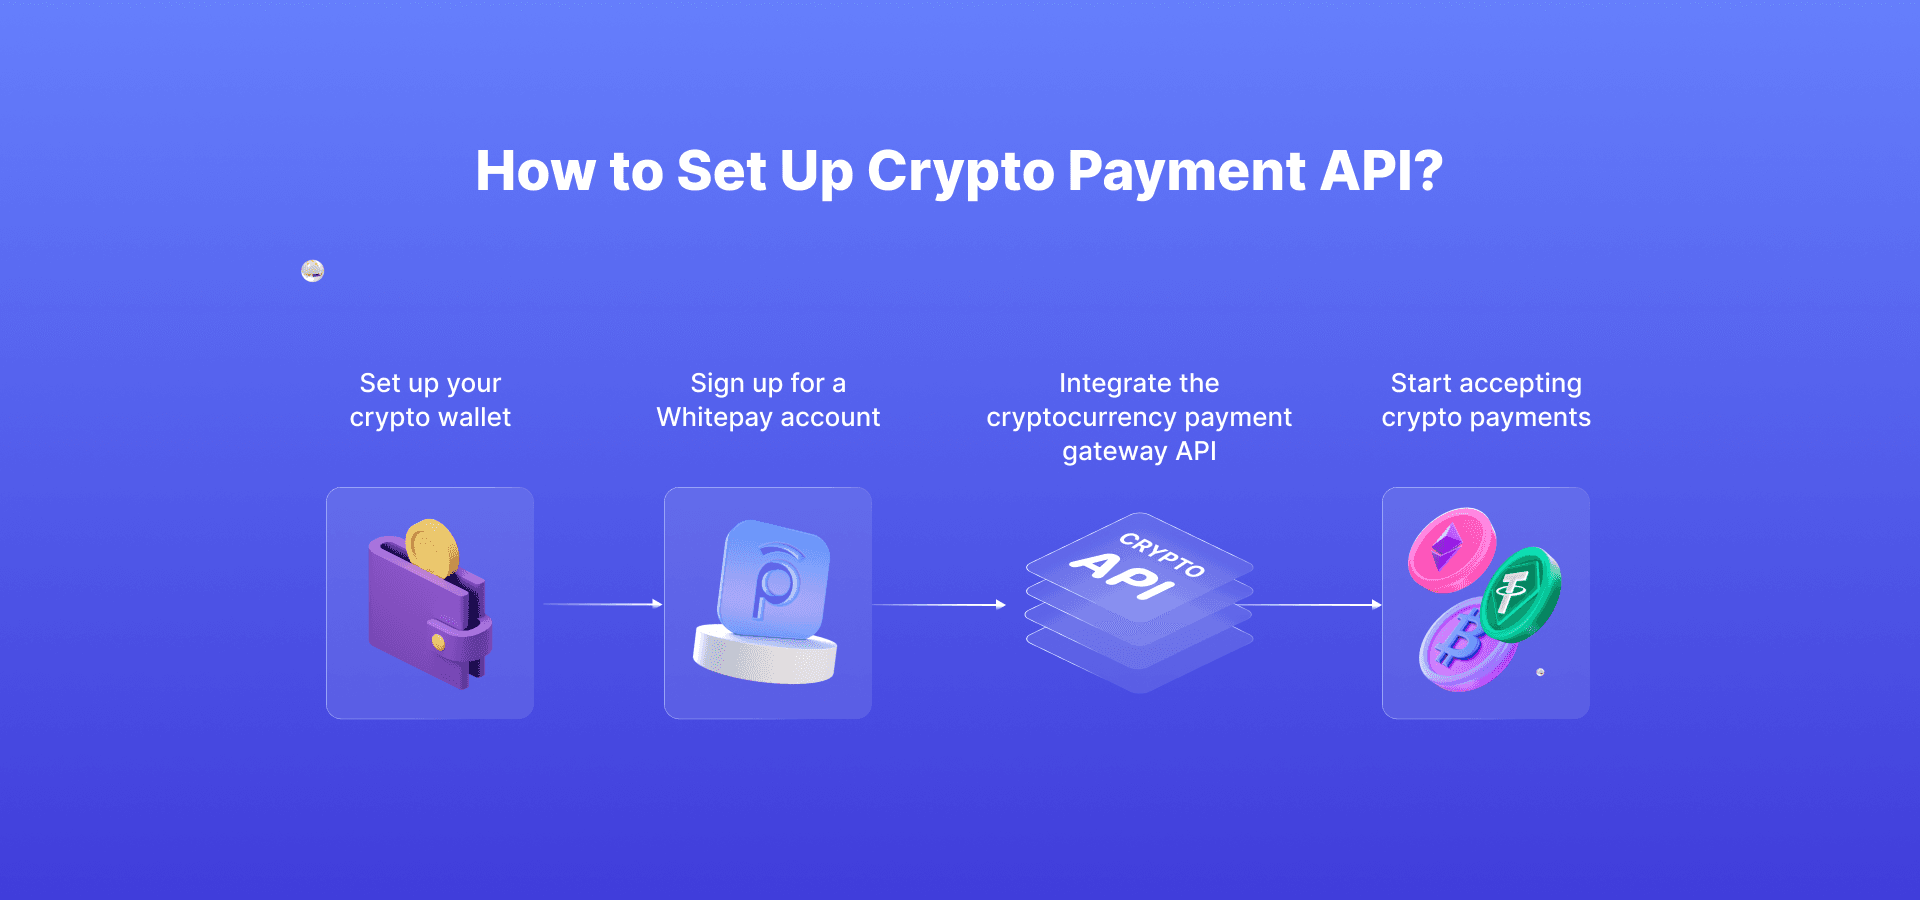 Accepting Crypto Payments Ecosystem for Business - CoinsPaid